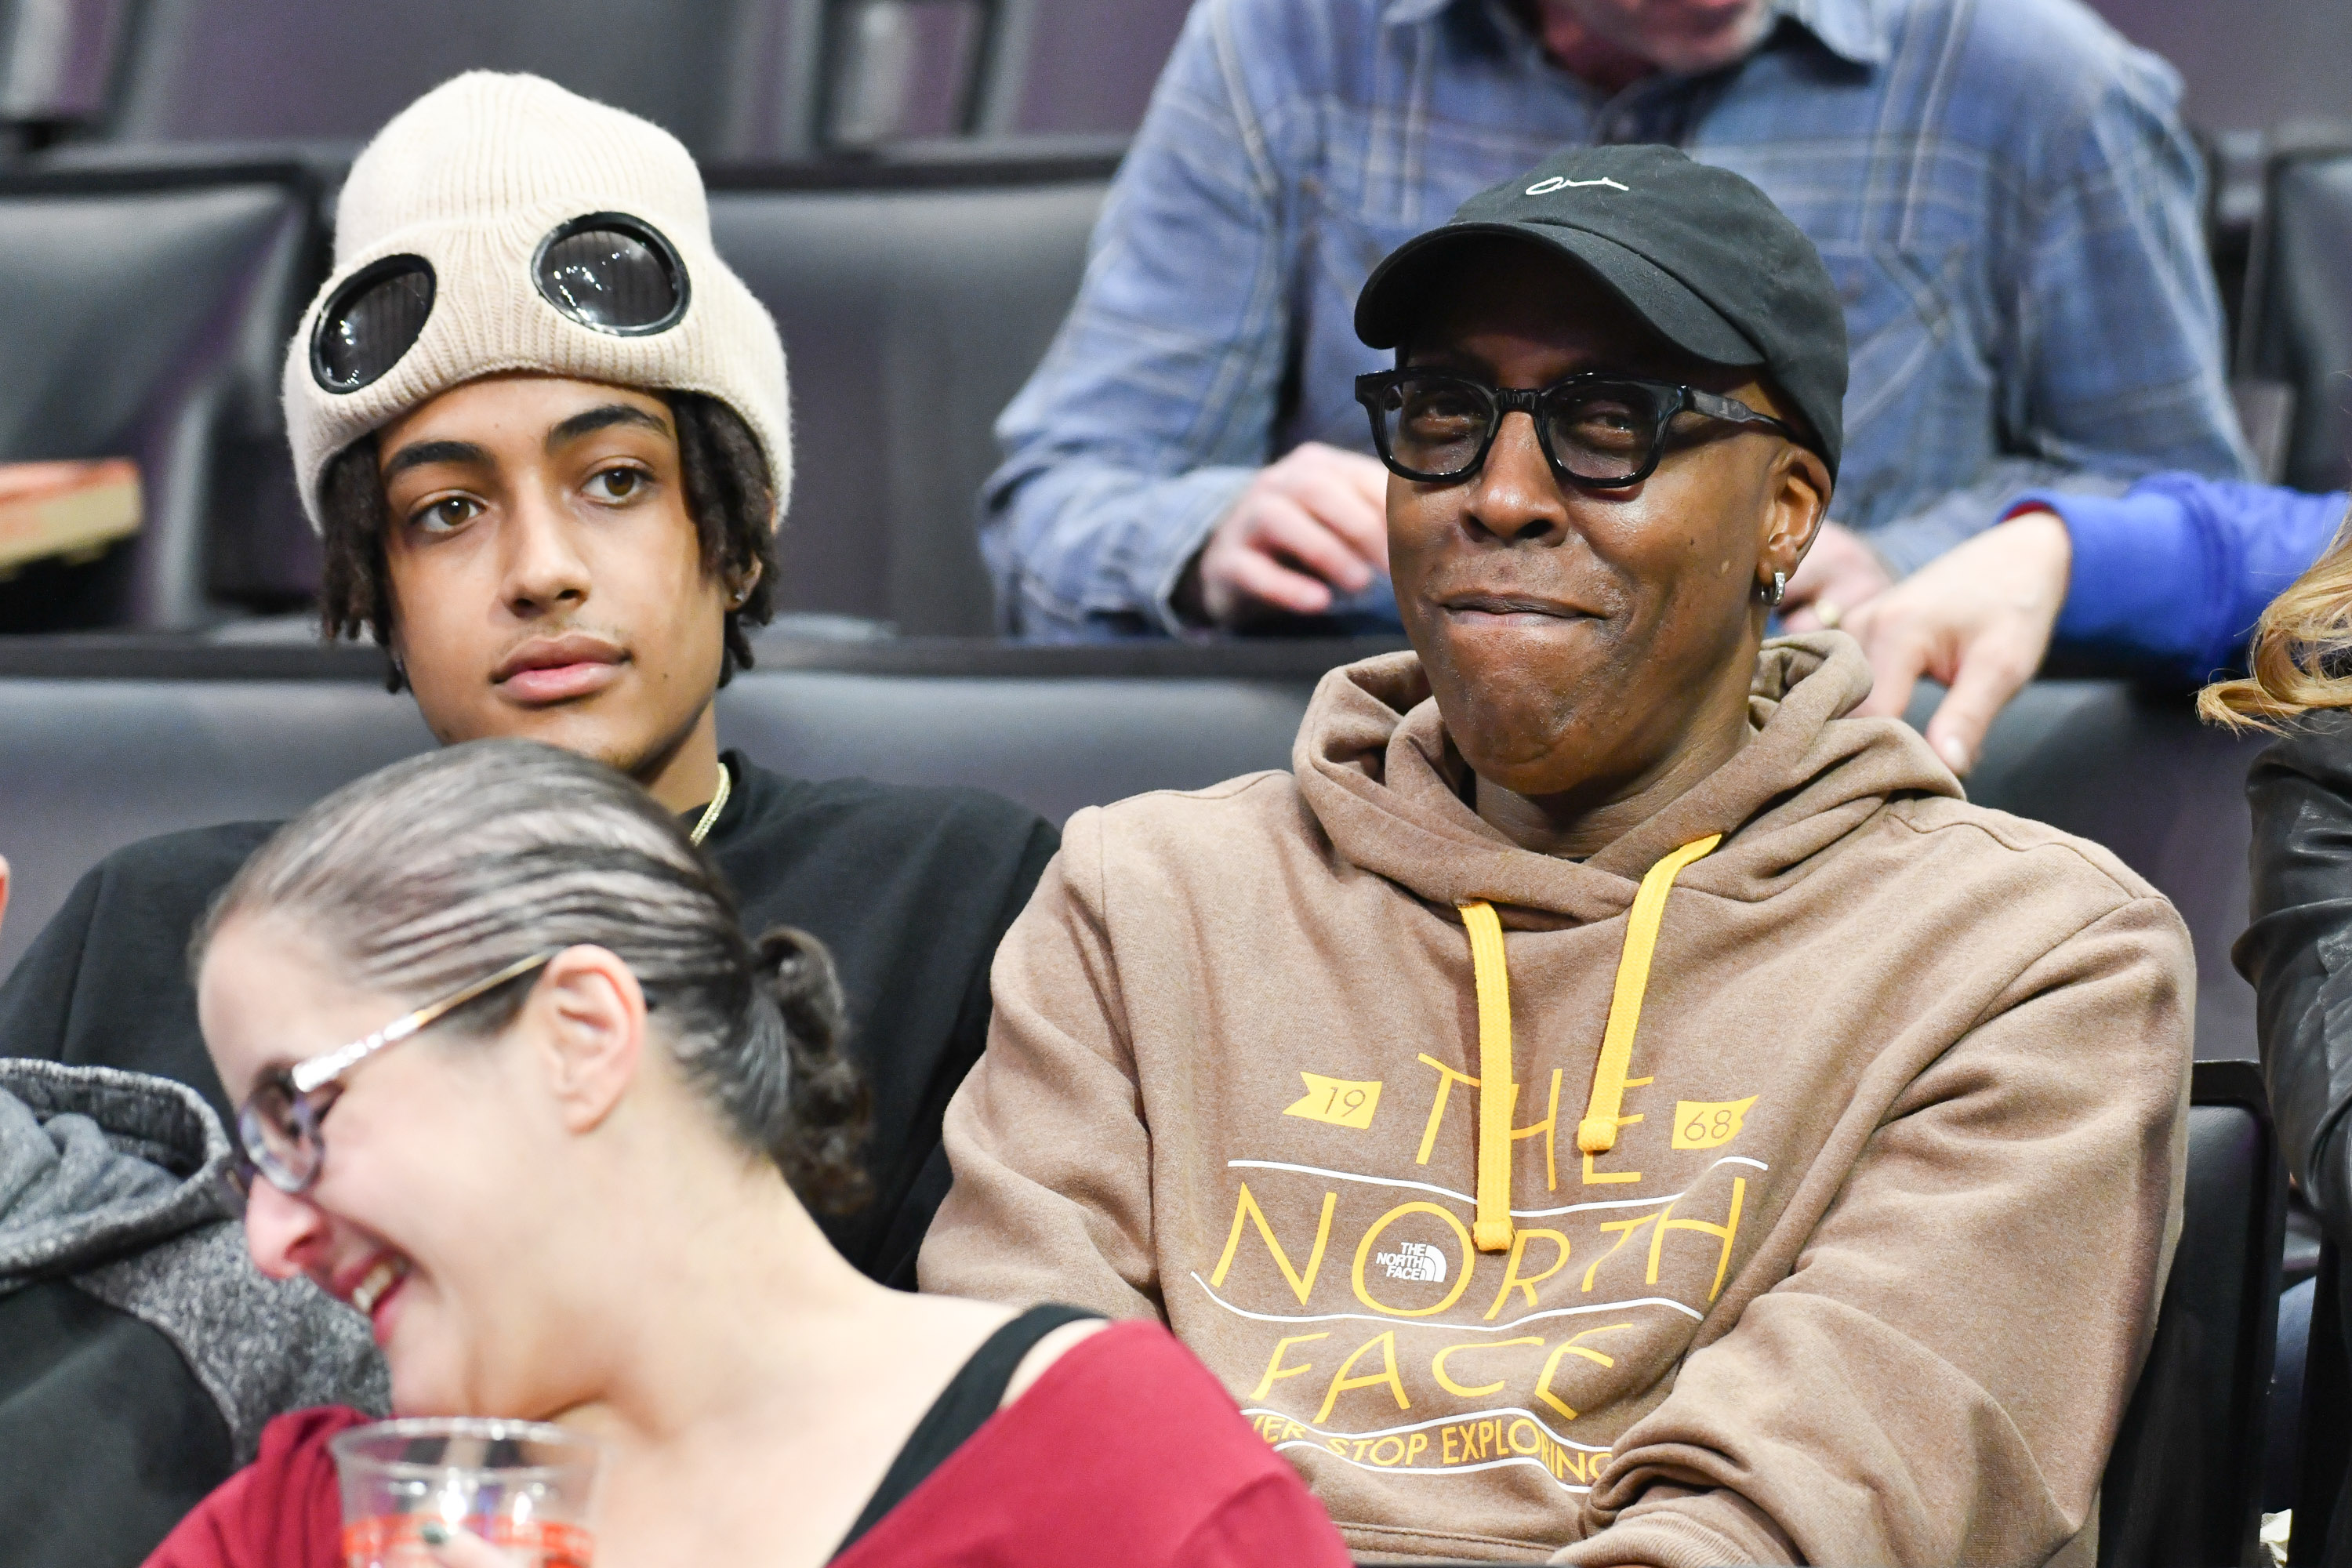 Arsenio Hall Jr. and Arsenio Hall watching the Los Angeles Clippers versus the New York Knicks on January 5, 2020, in Los Angeles, California. | Source: Getty Images